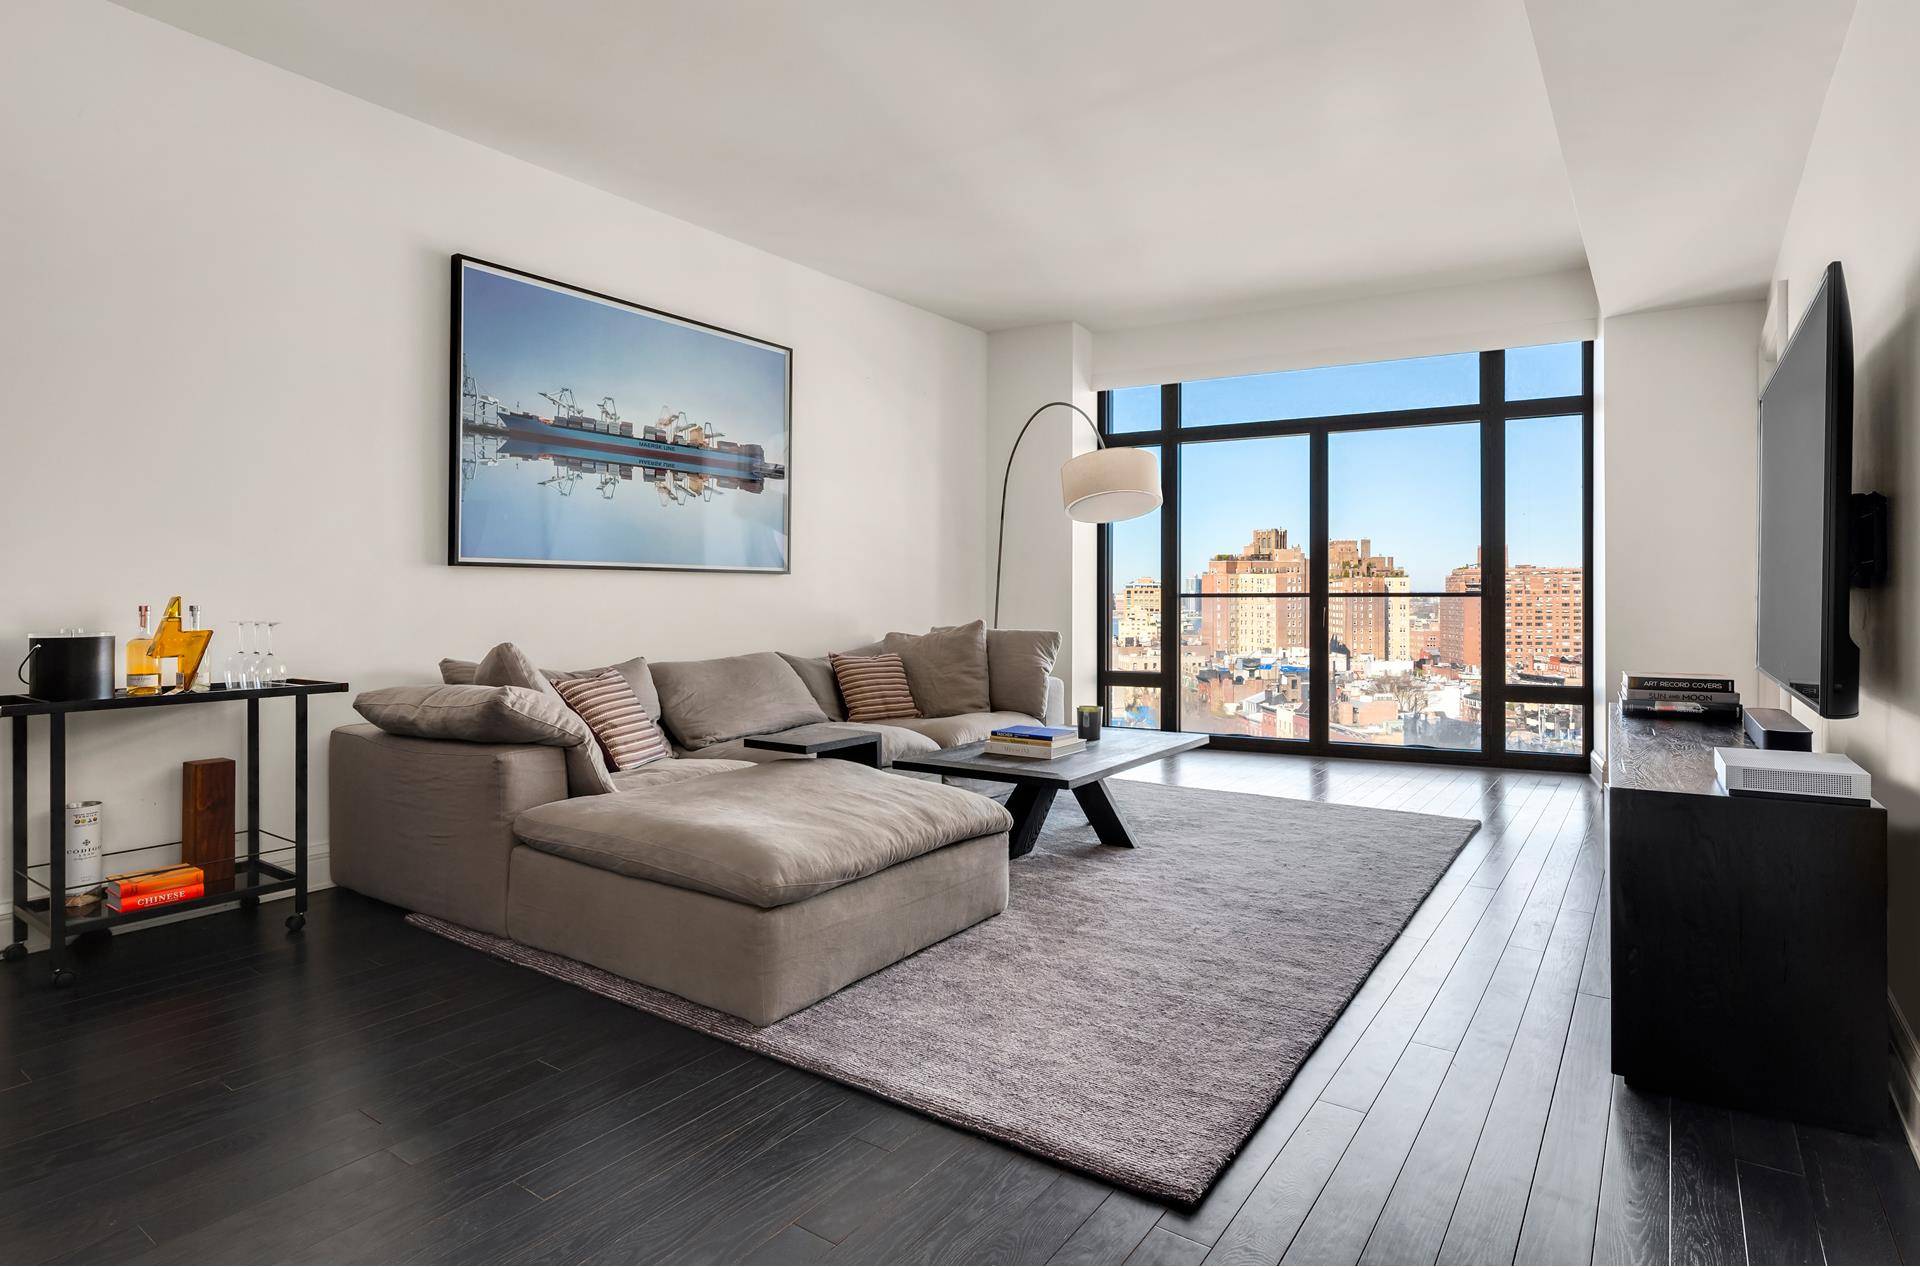 This tower residence is located on a high floor of the recently completed Greenwich Lane enclave of high end residences in the heart of New York's elysian Greenwich Village.